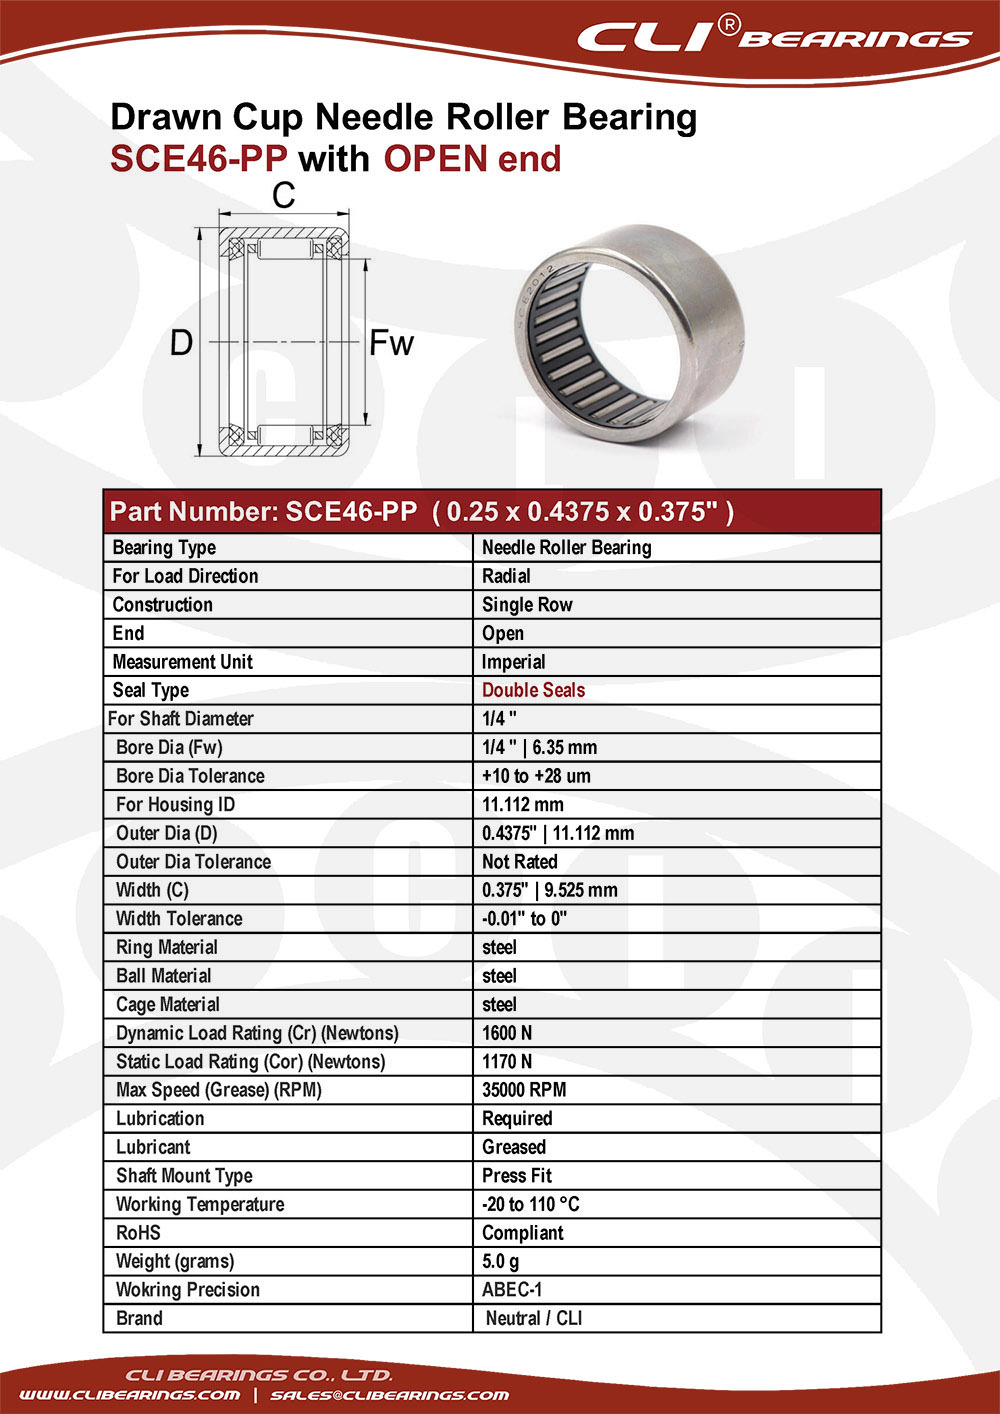 Original sce46 pp 0 25x0 4375x0 375 drawn cup needle roller bearings with double seals   cli bearings co ltd nw